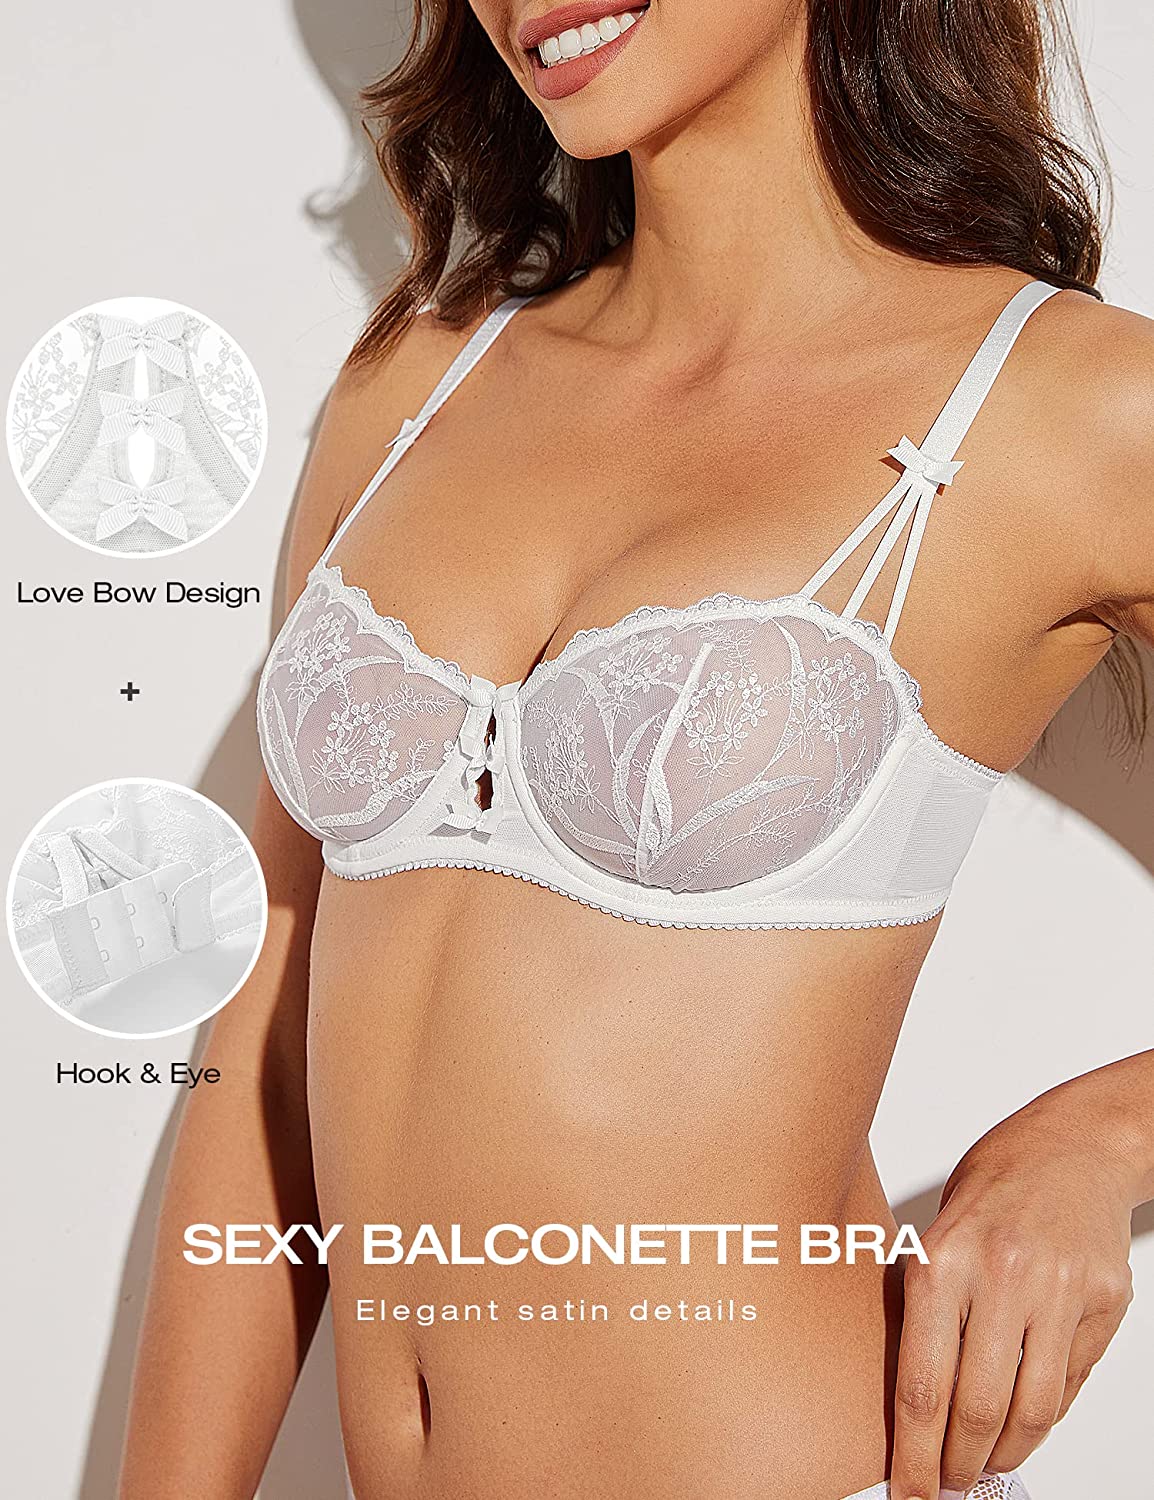 Unlined see thru Bras - Search Shopping